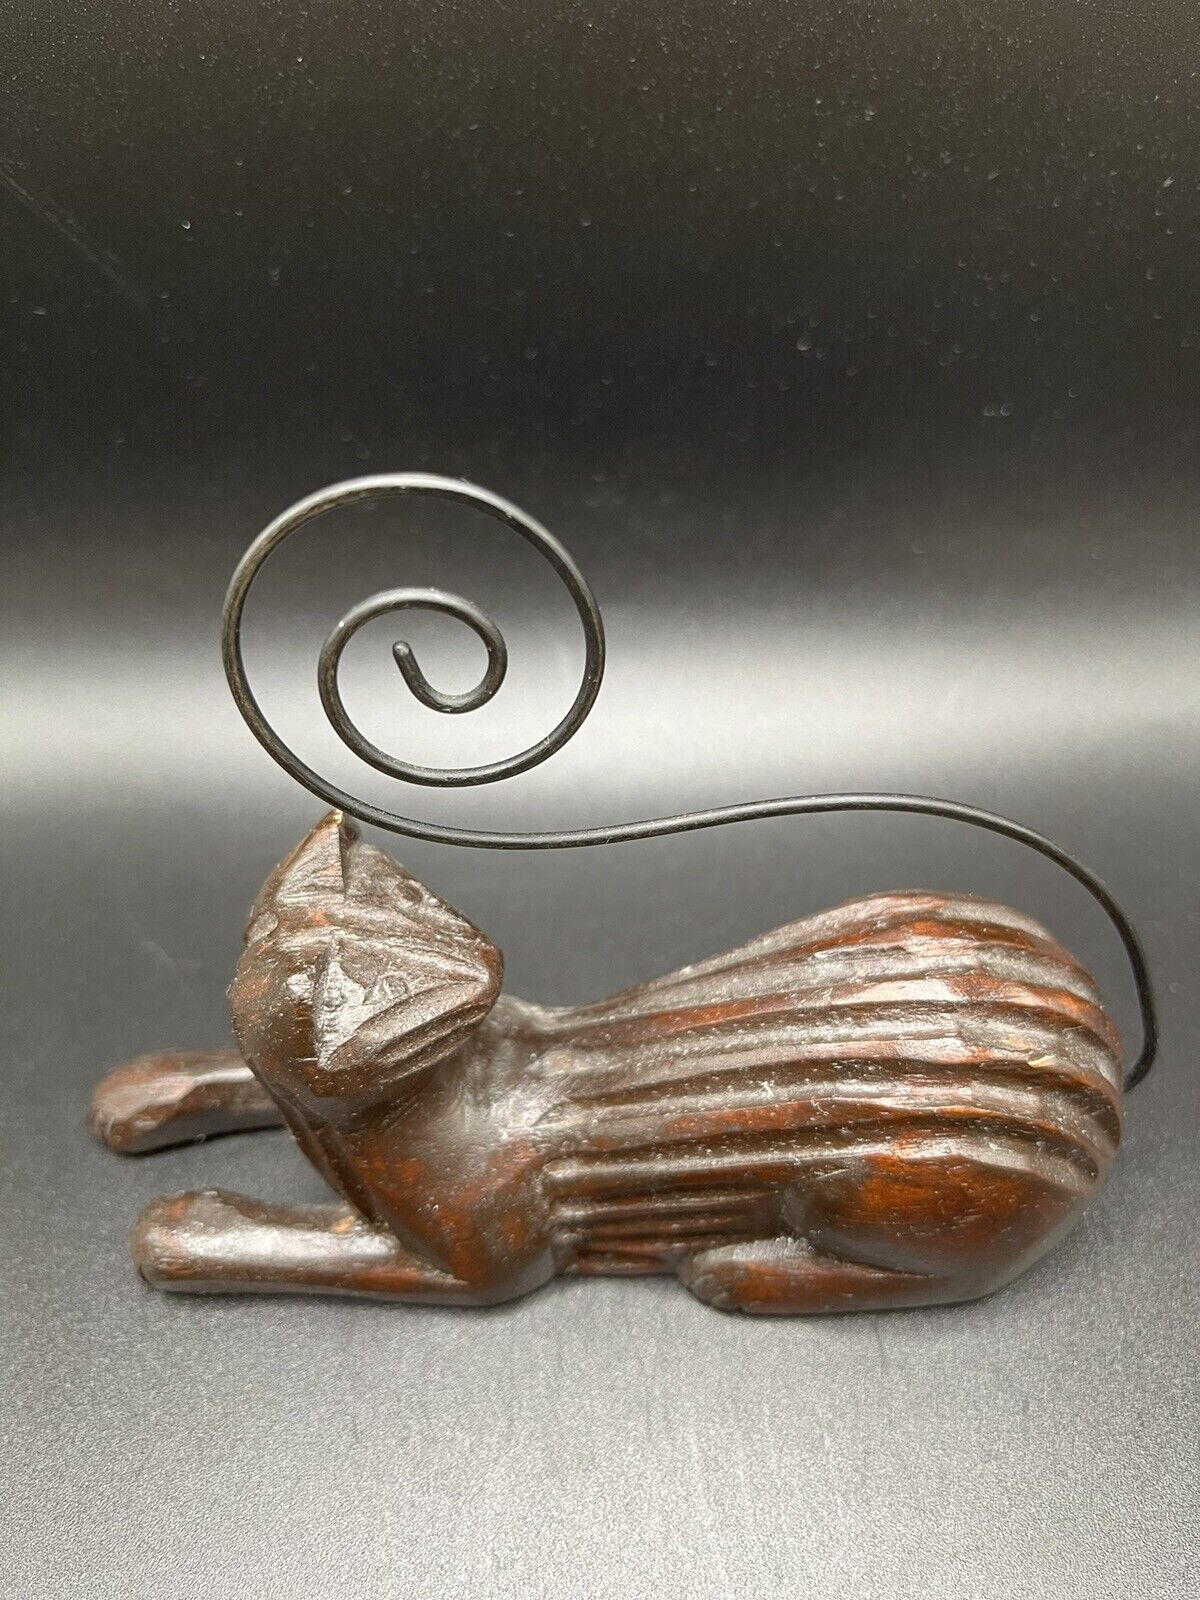 Wood Carved Cat Kitten Photo Card Holder Wire Tail Figure Figurine 4.5” X 1.5”